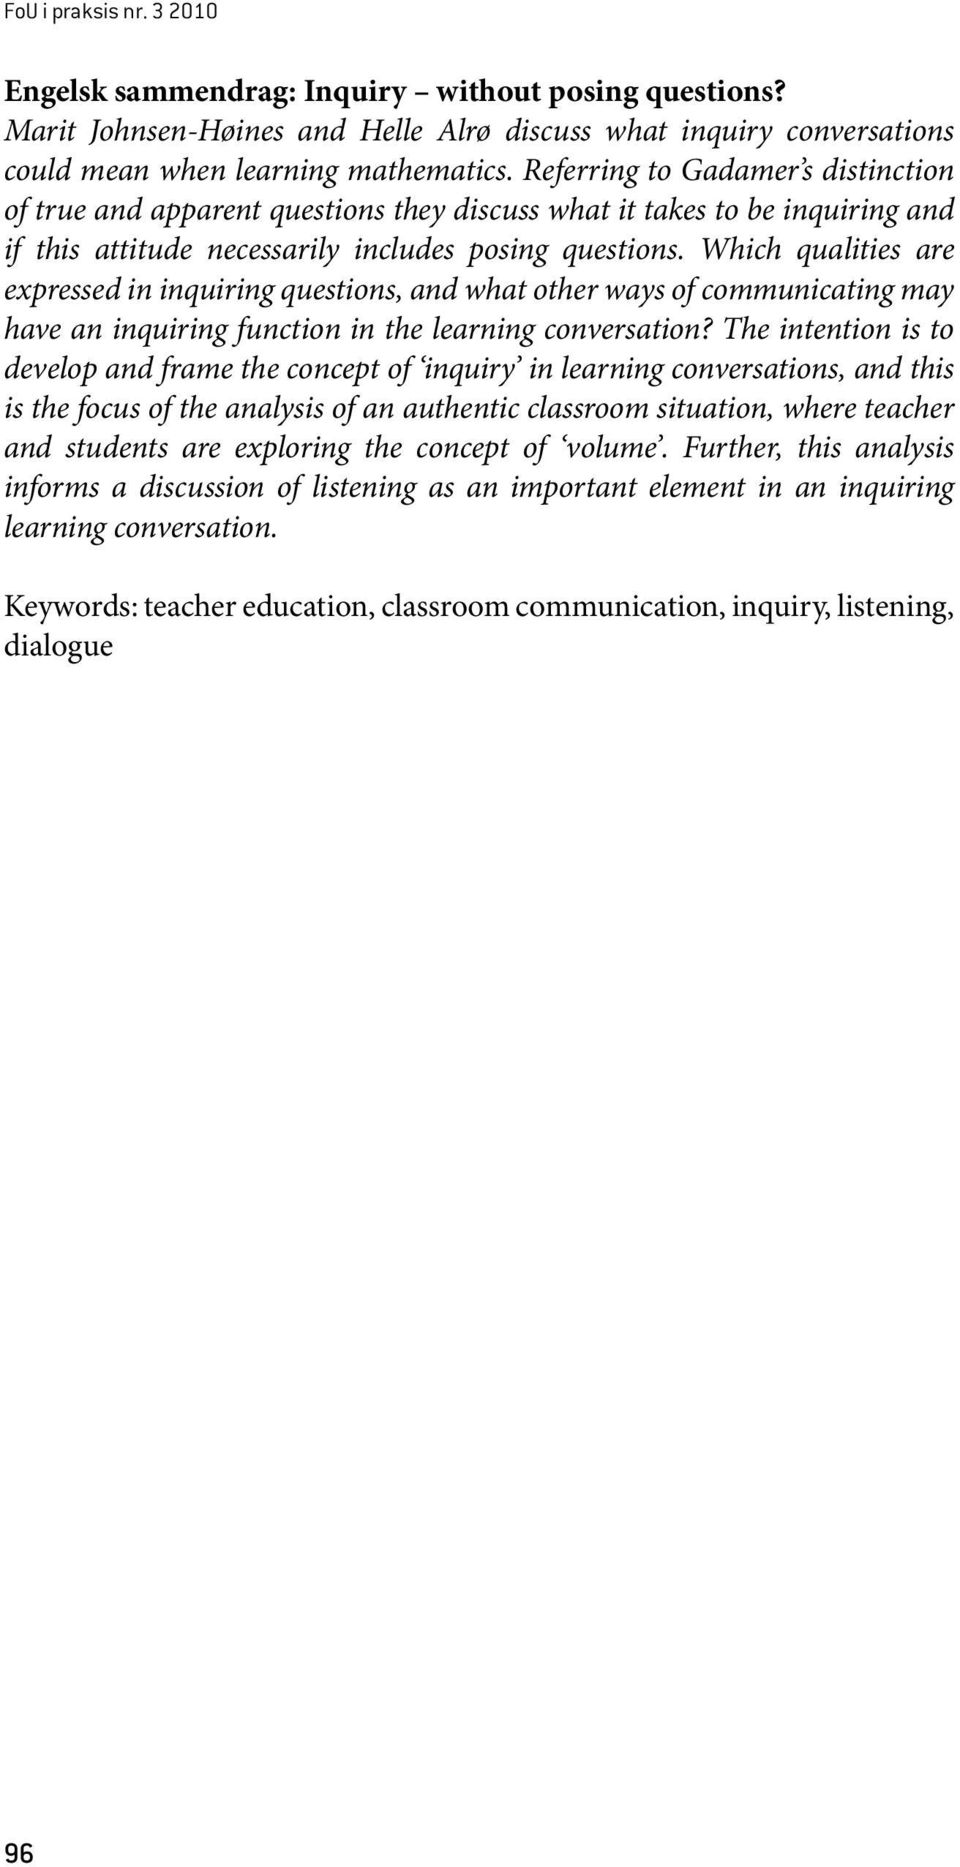 Which qualities are expressed in inquiring questions, and what other ways of communicating may have an inquiring function in the learning conversation?